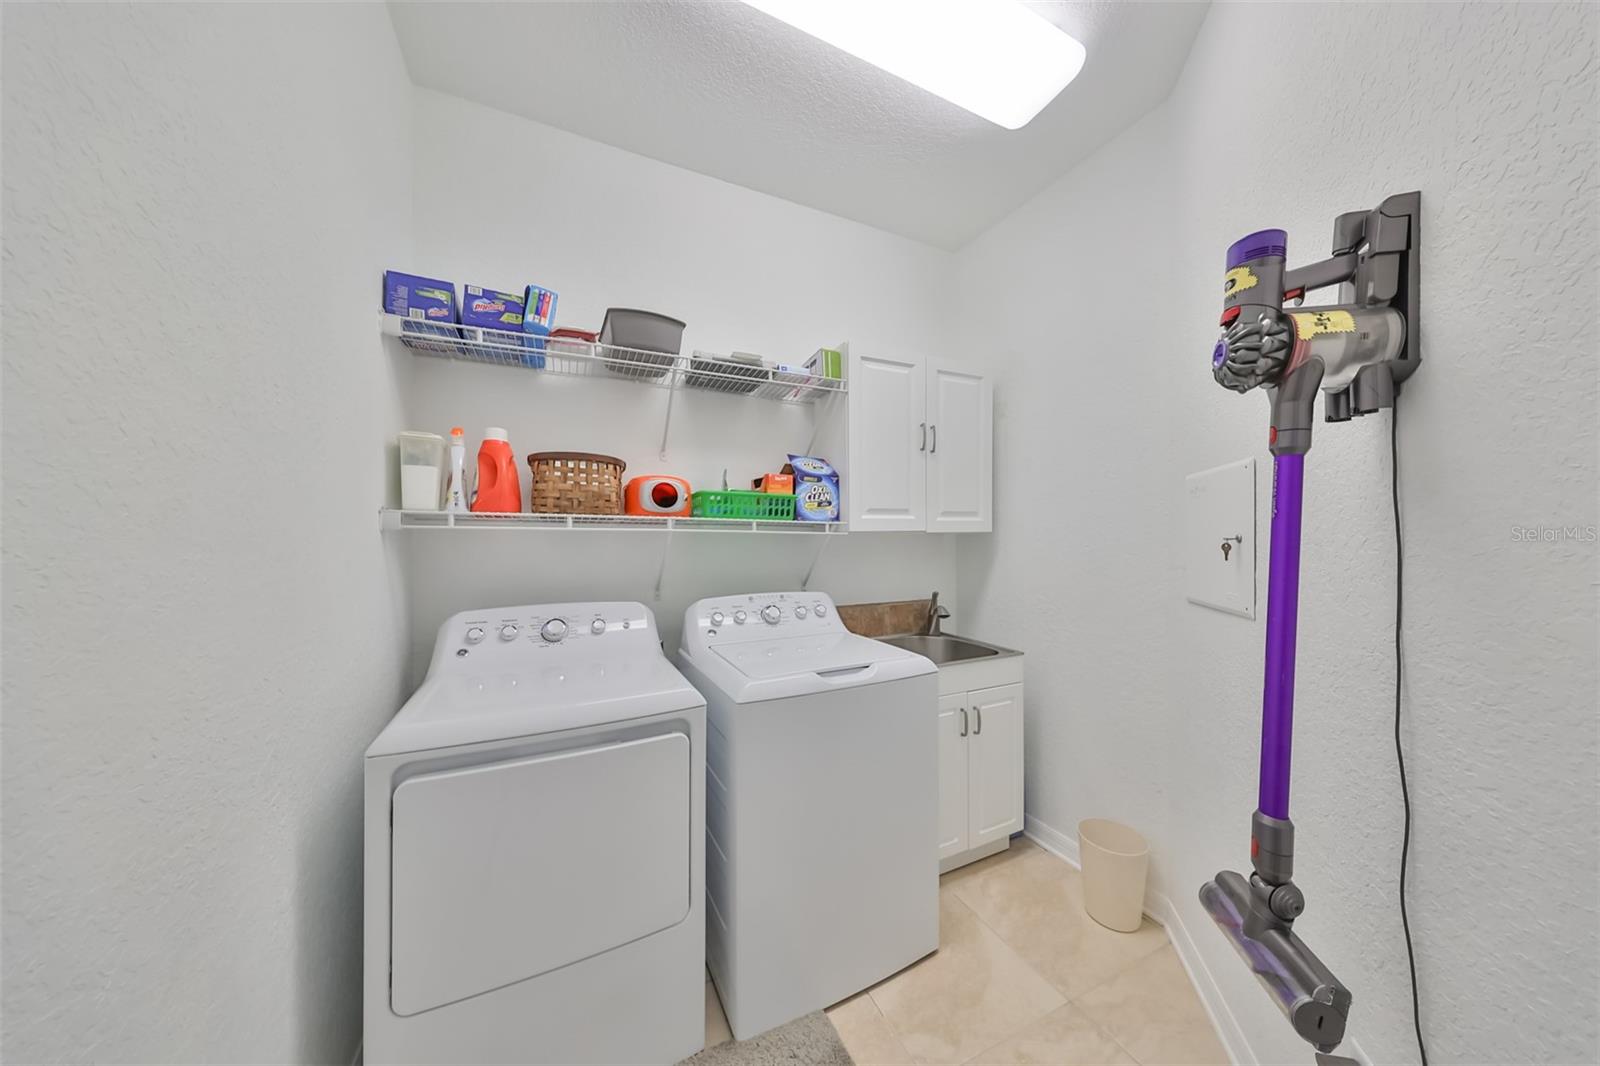 Laundry Room is conveniently upstairs with a utility sink, shelving and bright lights.